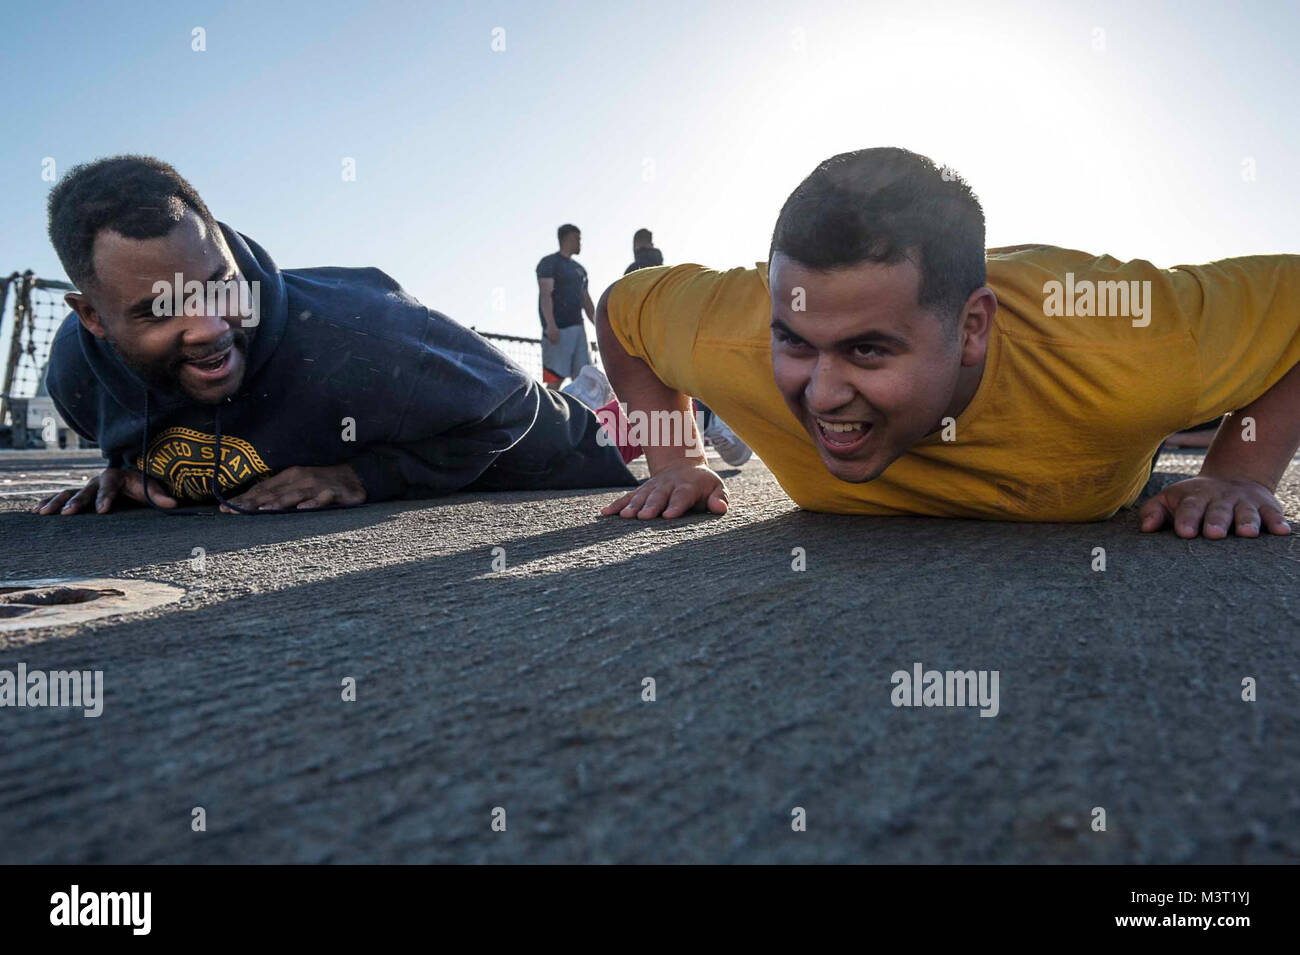 160219-N-MD297-055 PACIFIC OCEAN (Feb. 17, 2016) - Culinary Specialist 3rd Class Carlos Guajardo, right, and Engineman 3rd Class Derrell Johnson motivate each other during a Squid Fit class aboard Arleigh Burke-class guided-missile destroyer USS Lassen (DDG 82). Lassen is currently underway in support of Operation Martillo, a joint operation with the U.S. Coast Guard and partner nations within the 4th Fleet area of responsibility. Operation Martillo is being led by Joint Interagency Task Force South, in support of U.S. Southern Command. (U.S. Navy photo by Mass Communication Specialist 2nd Cla Stock Photo